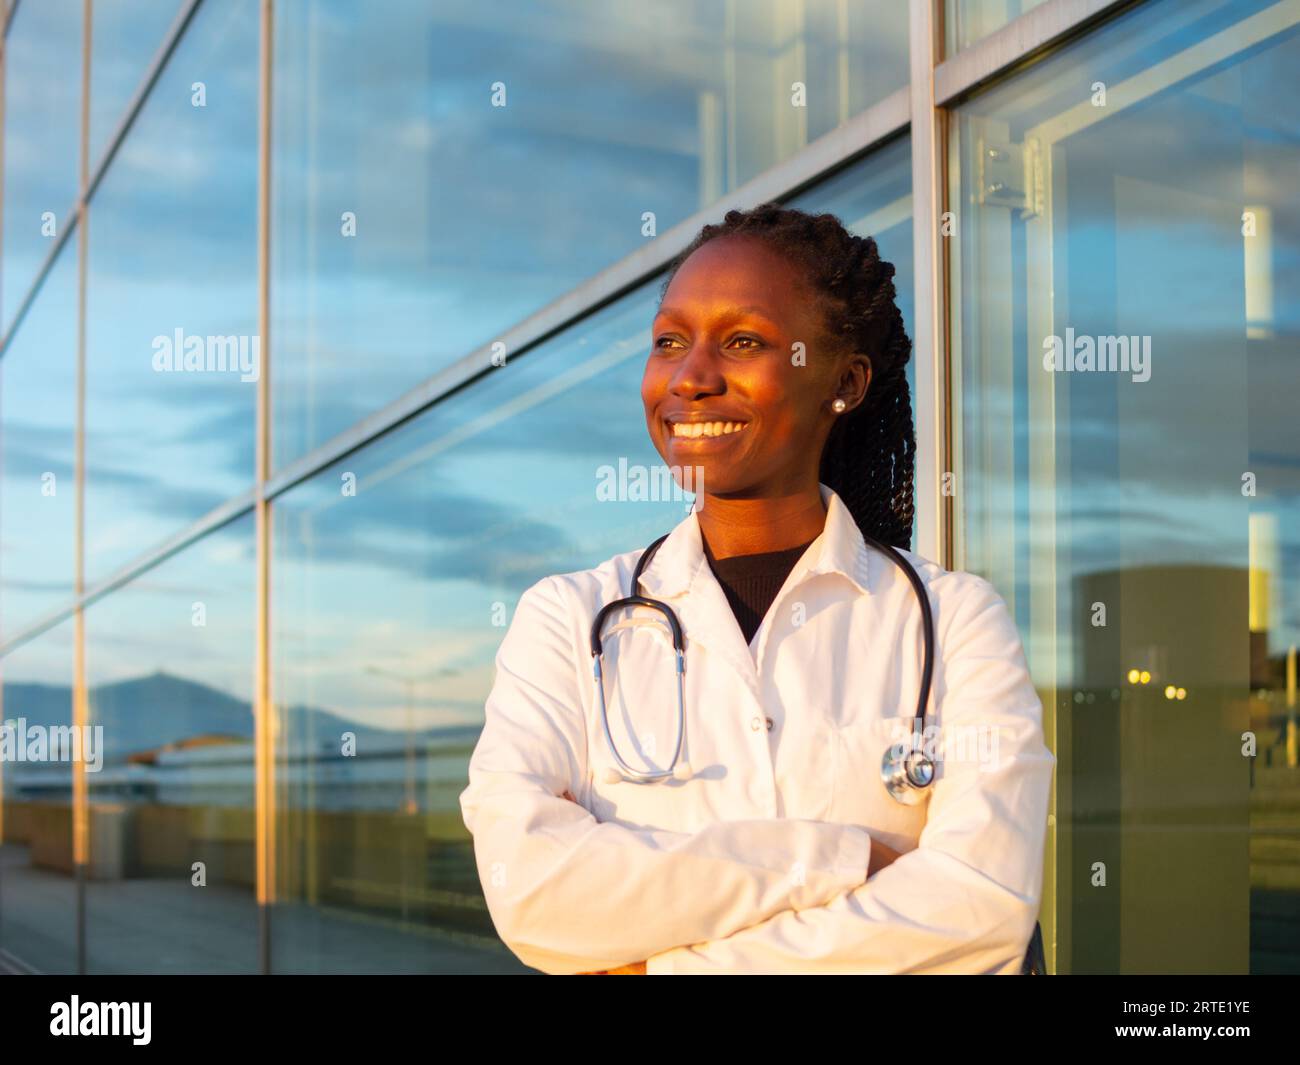 young female doctor crossing her arms in front of a hospital Stock Photo